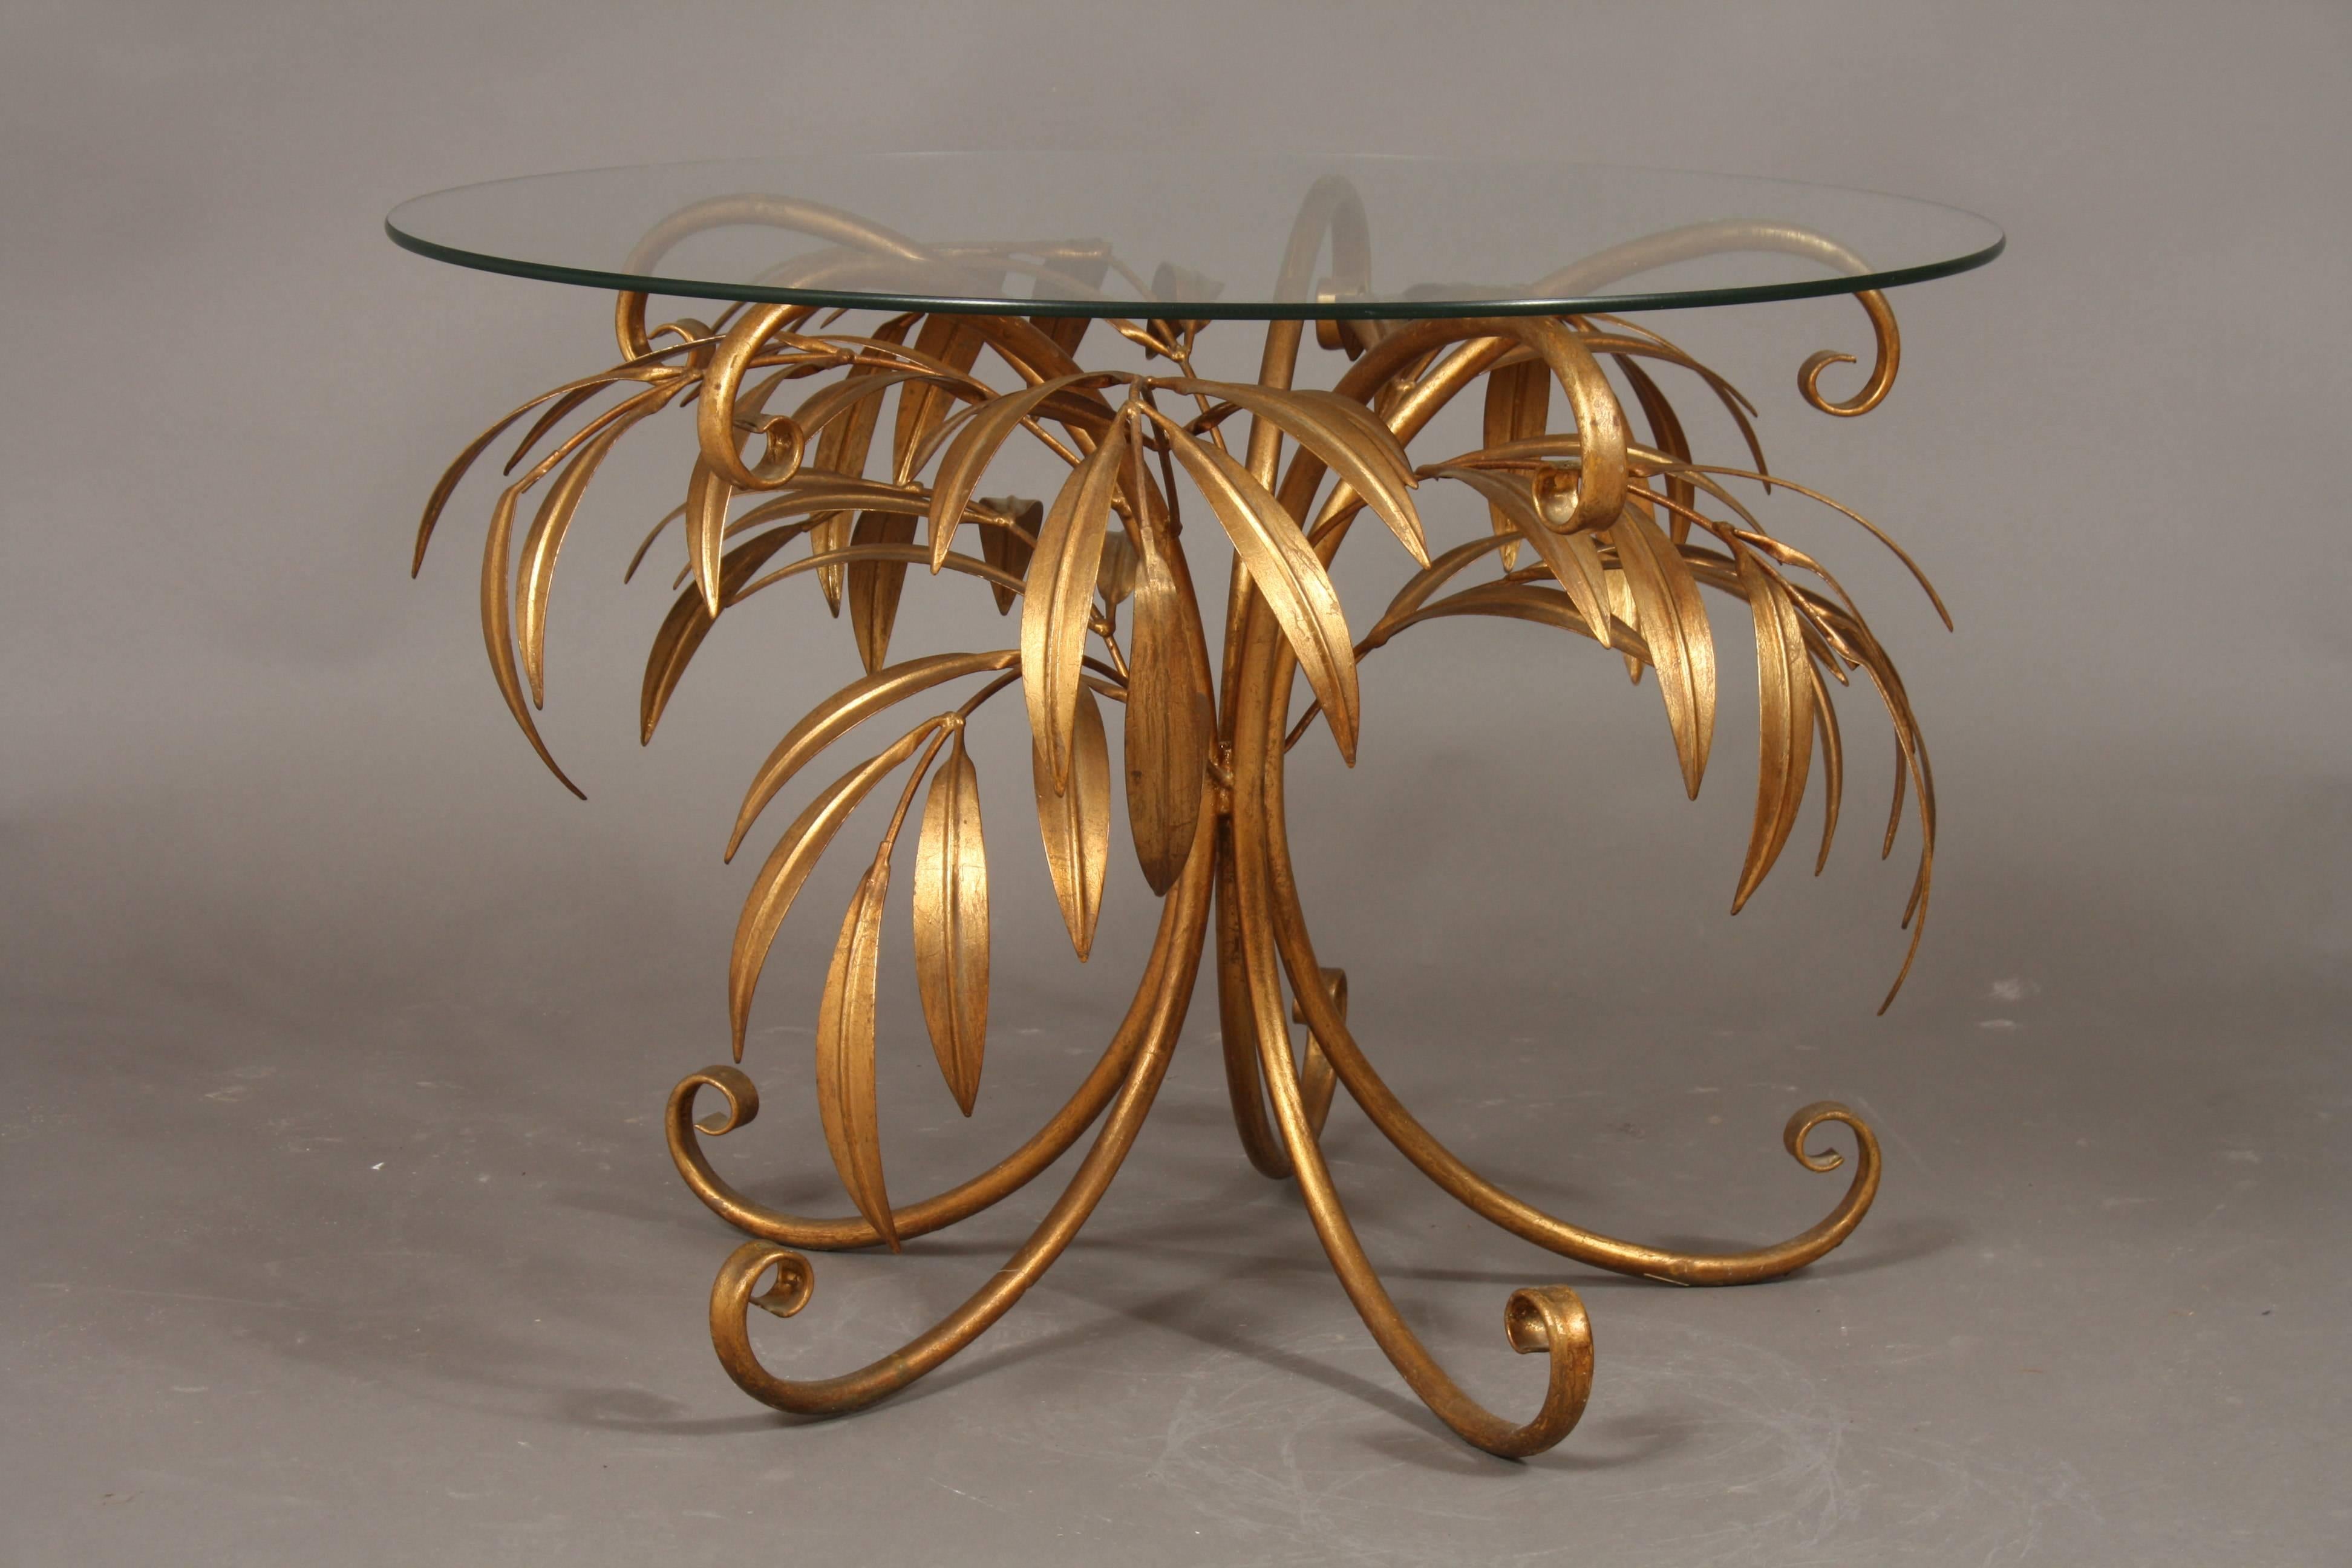 1960s Hans Kögl Gold Palm Tree table. Beautiful table with brass gold leaf frame and round glass on top. Use it as a coffee table or just a side table.